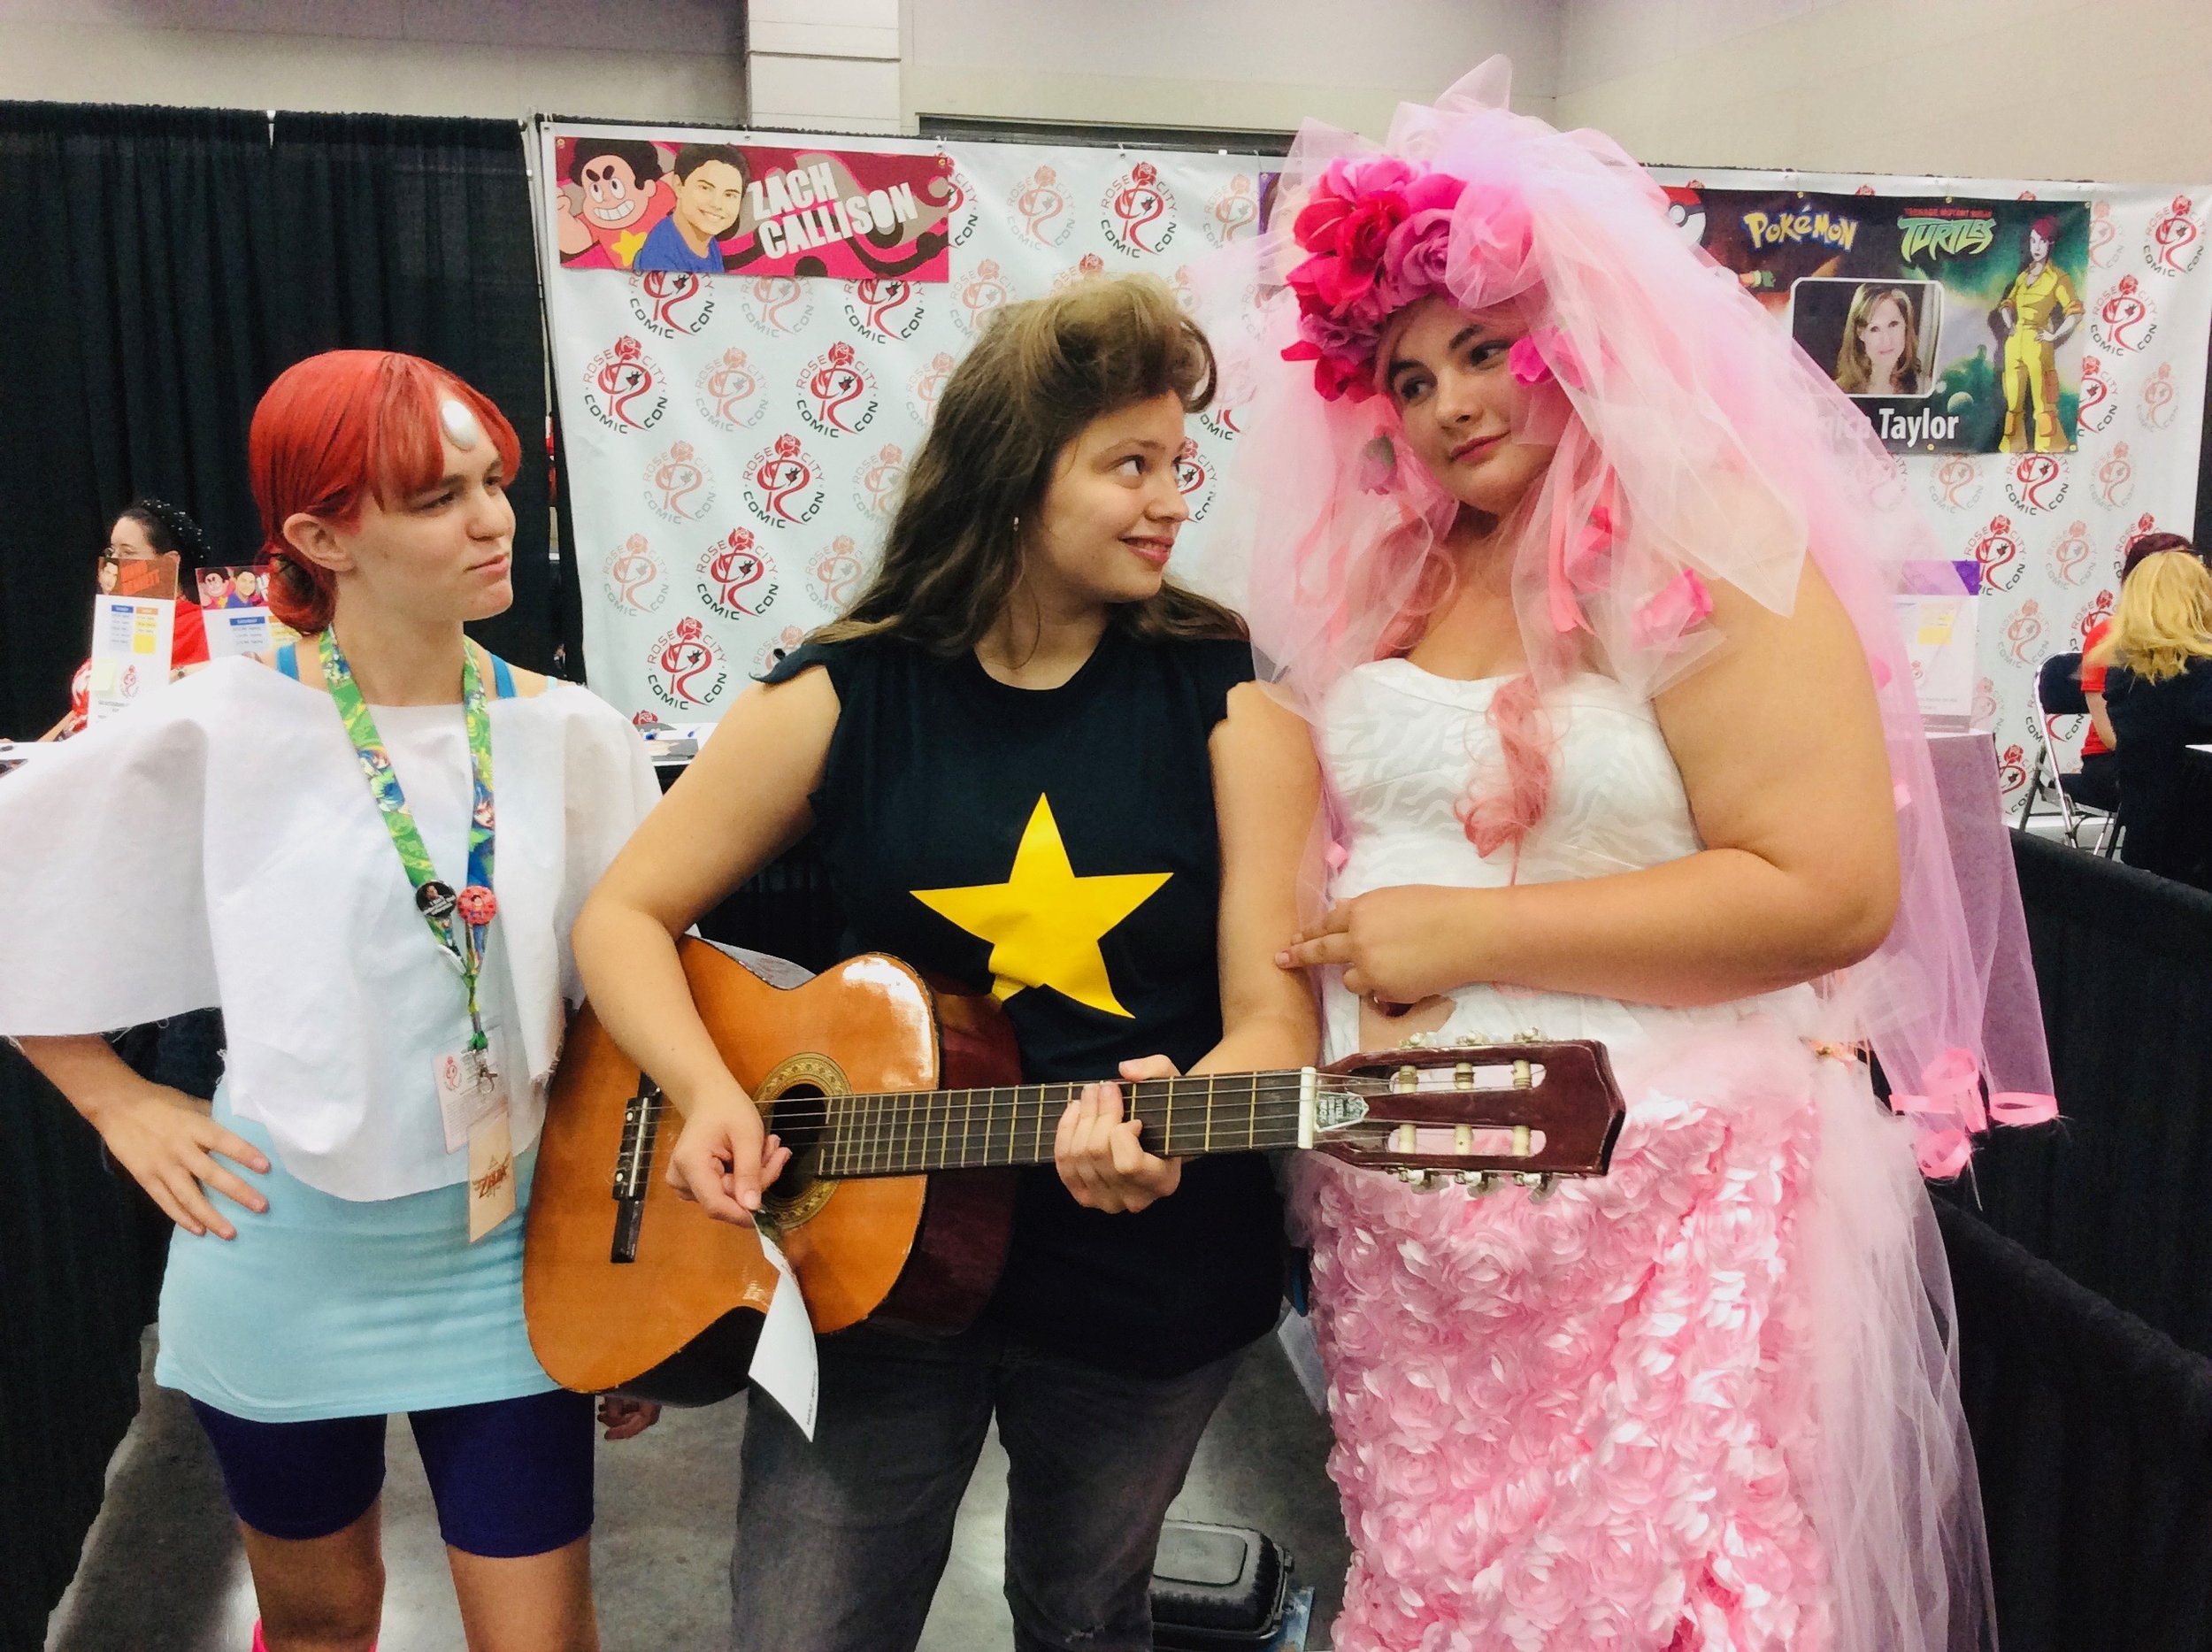 Perfectly in-character Steven Universe cosplayers